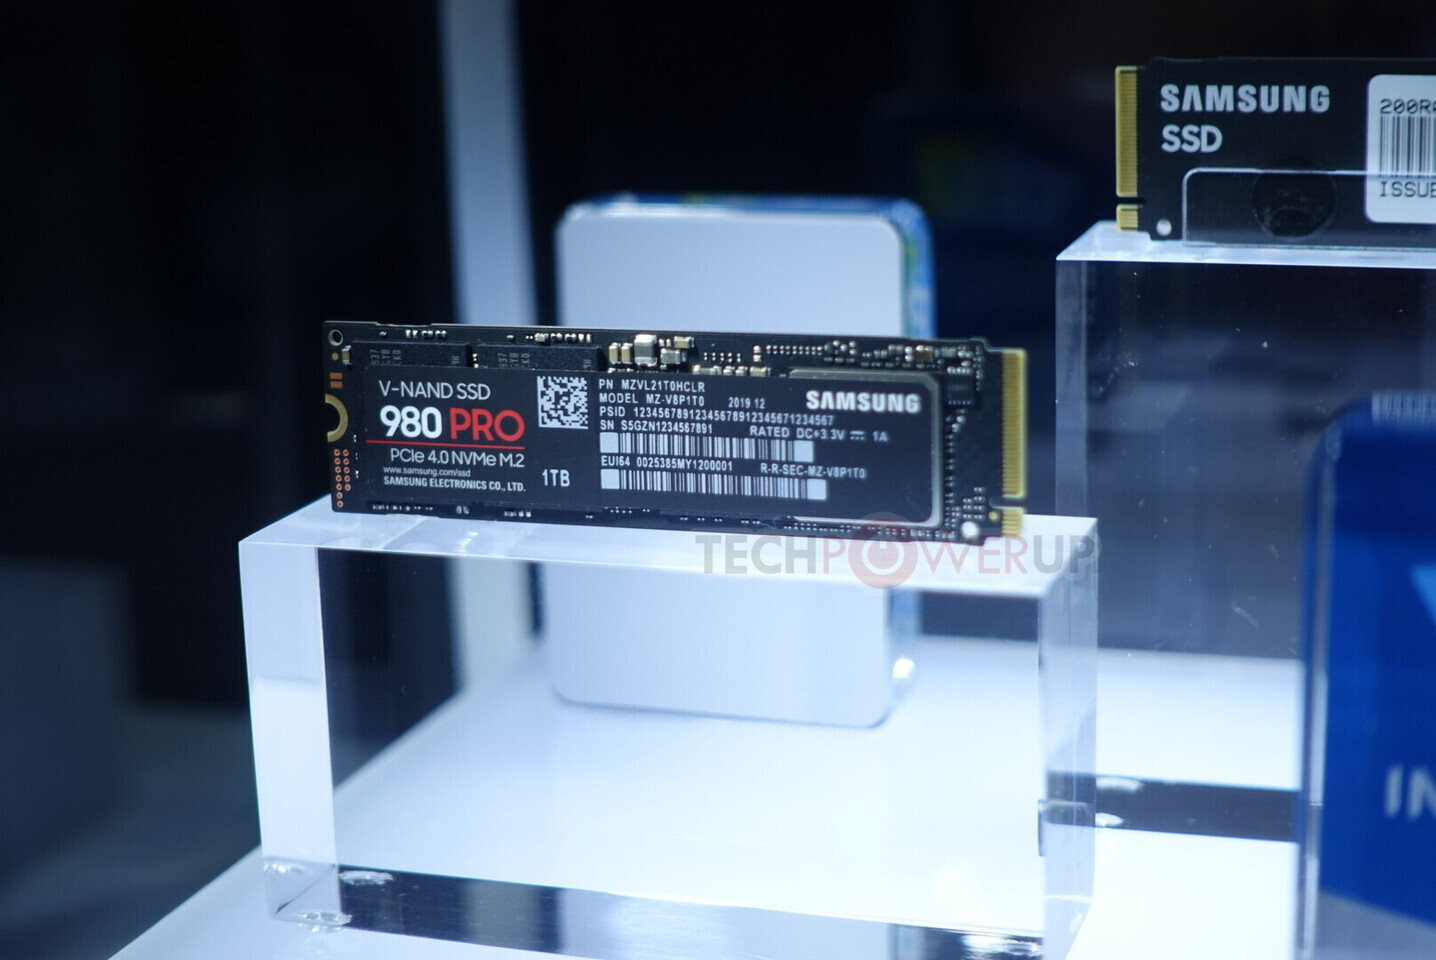 Samsung 980 Pro PCIe 4.0 SSD Rumored to Launch Within Two Months